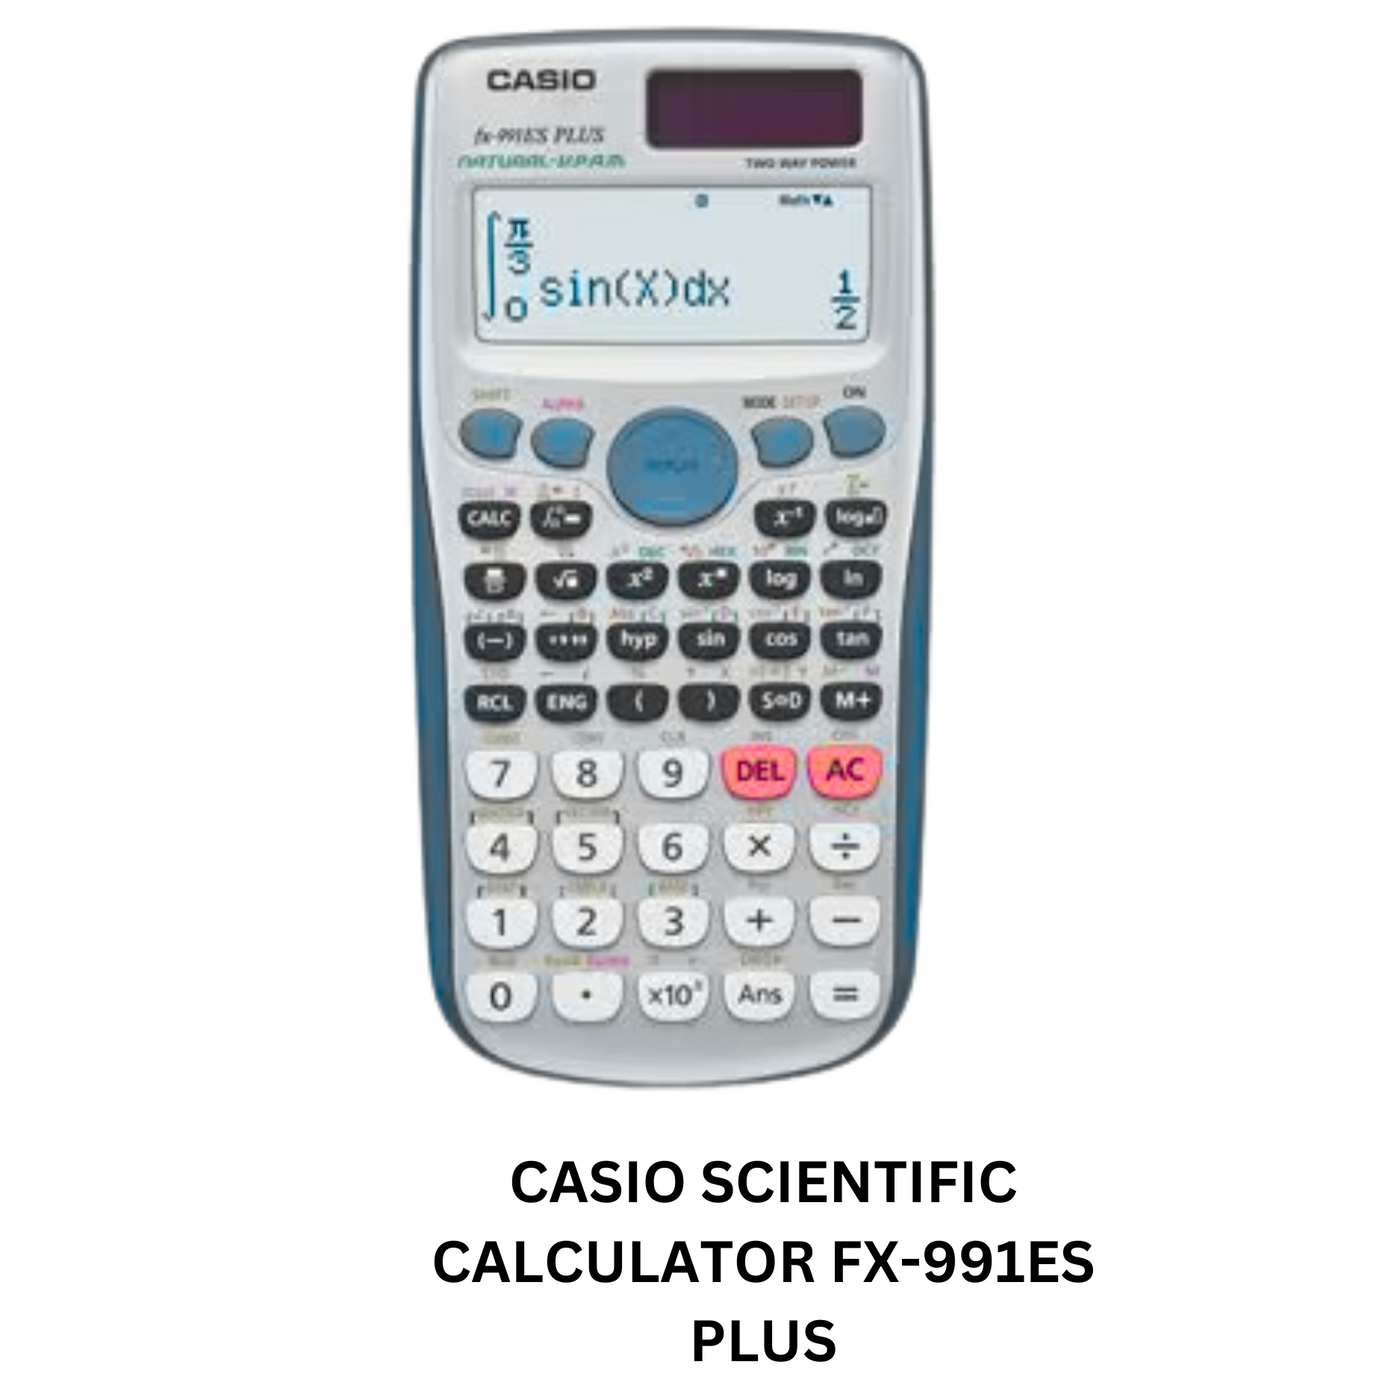 Casio FX-991ES Plus Scientific Calculator with dual-line display and extensive mathematical functions for students and professionals